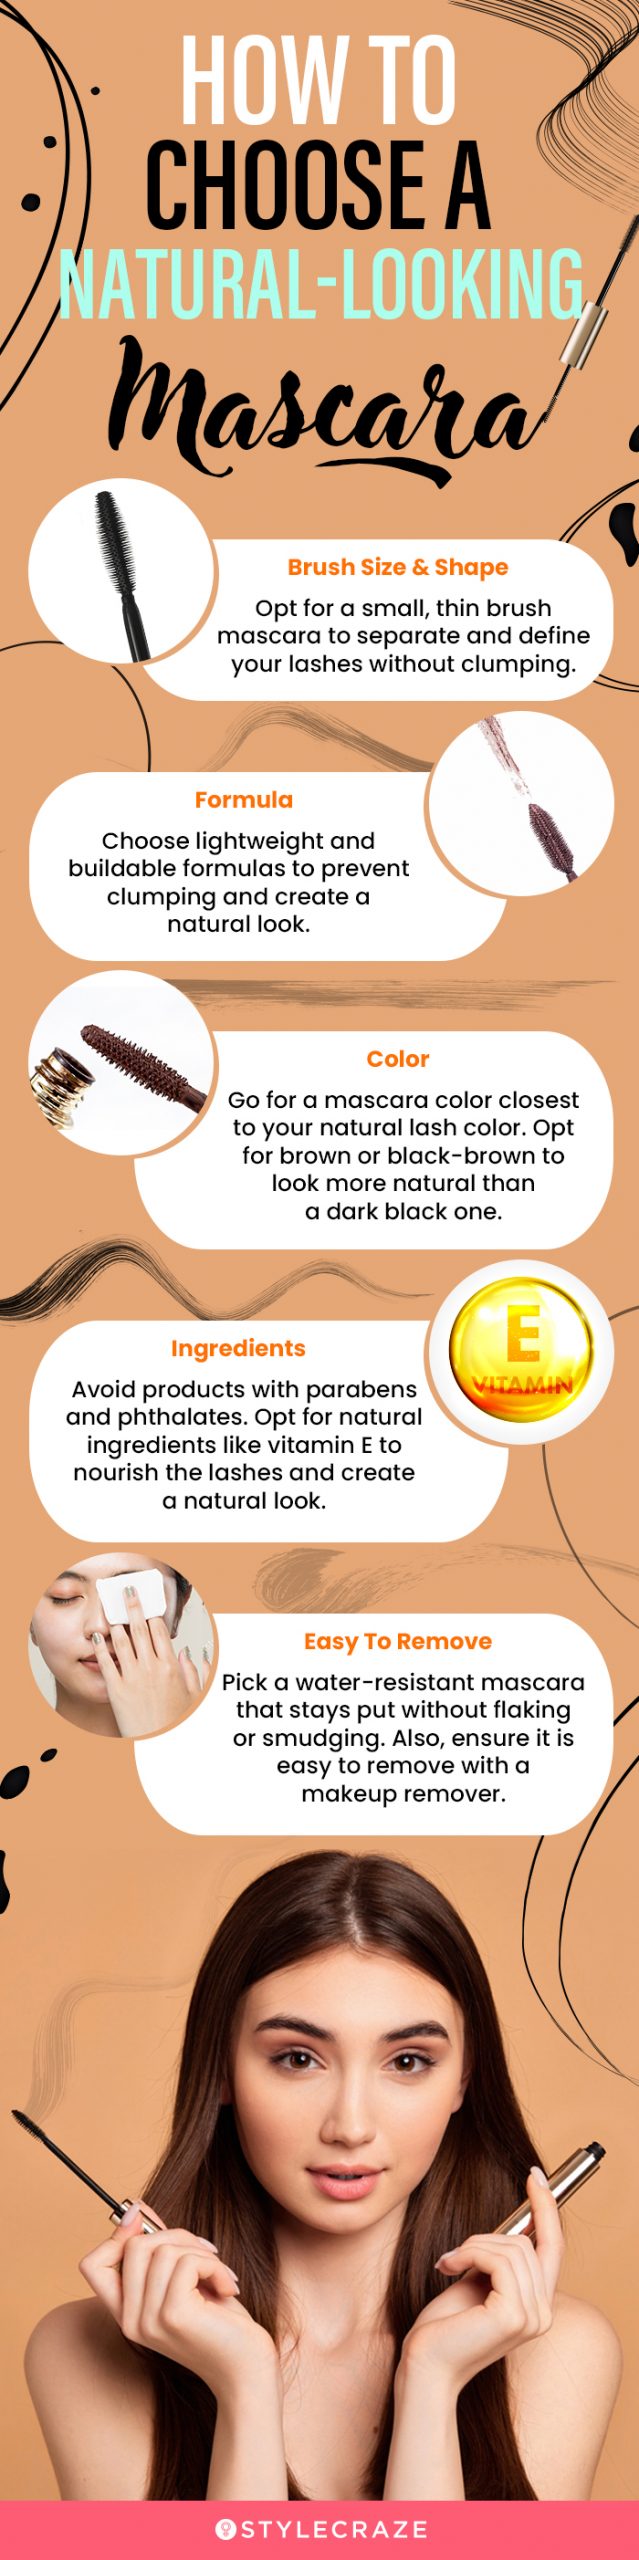 How To Choose A Natural-Looking Mascara (infographic)